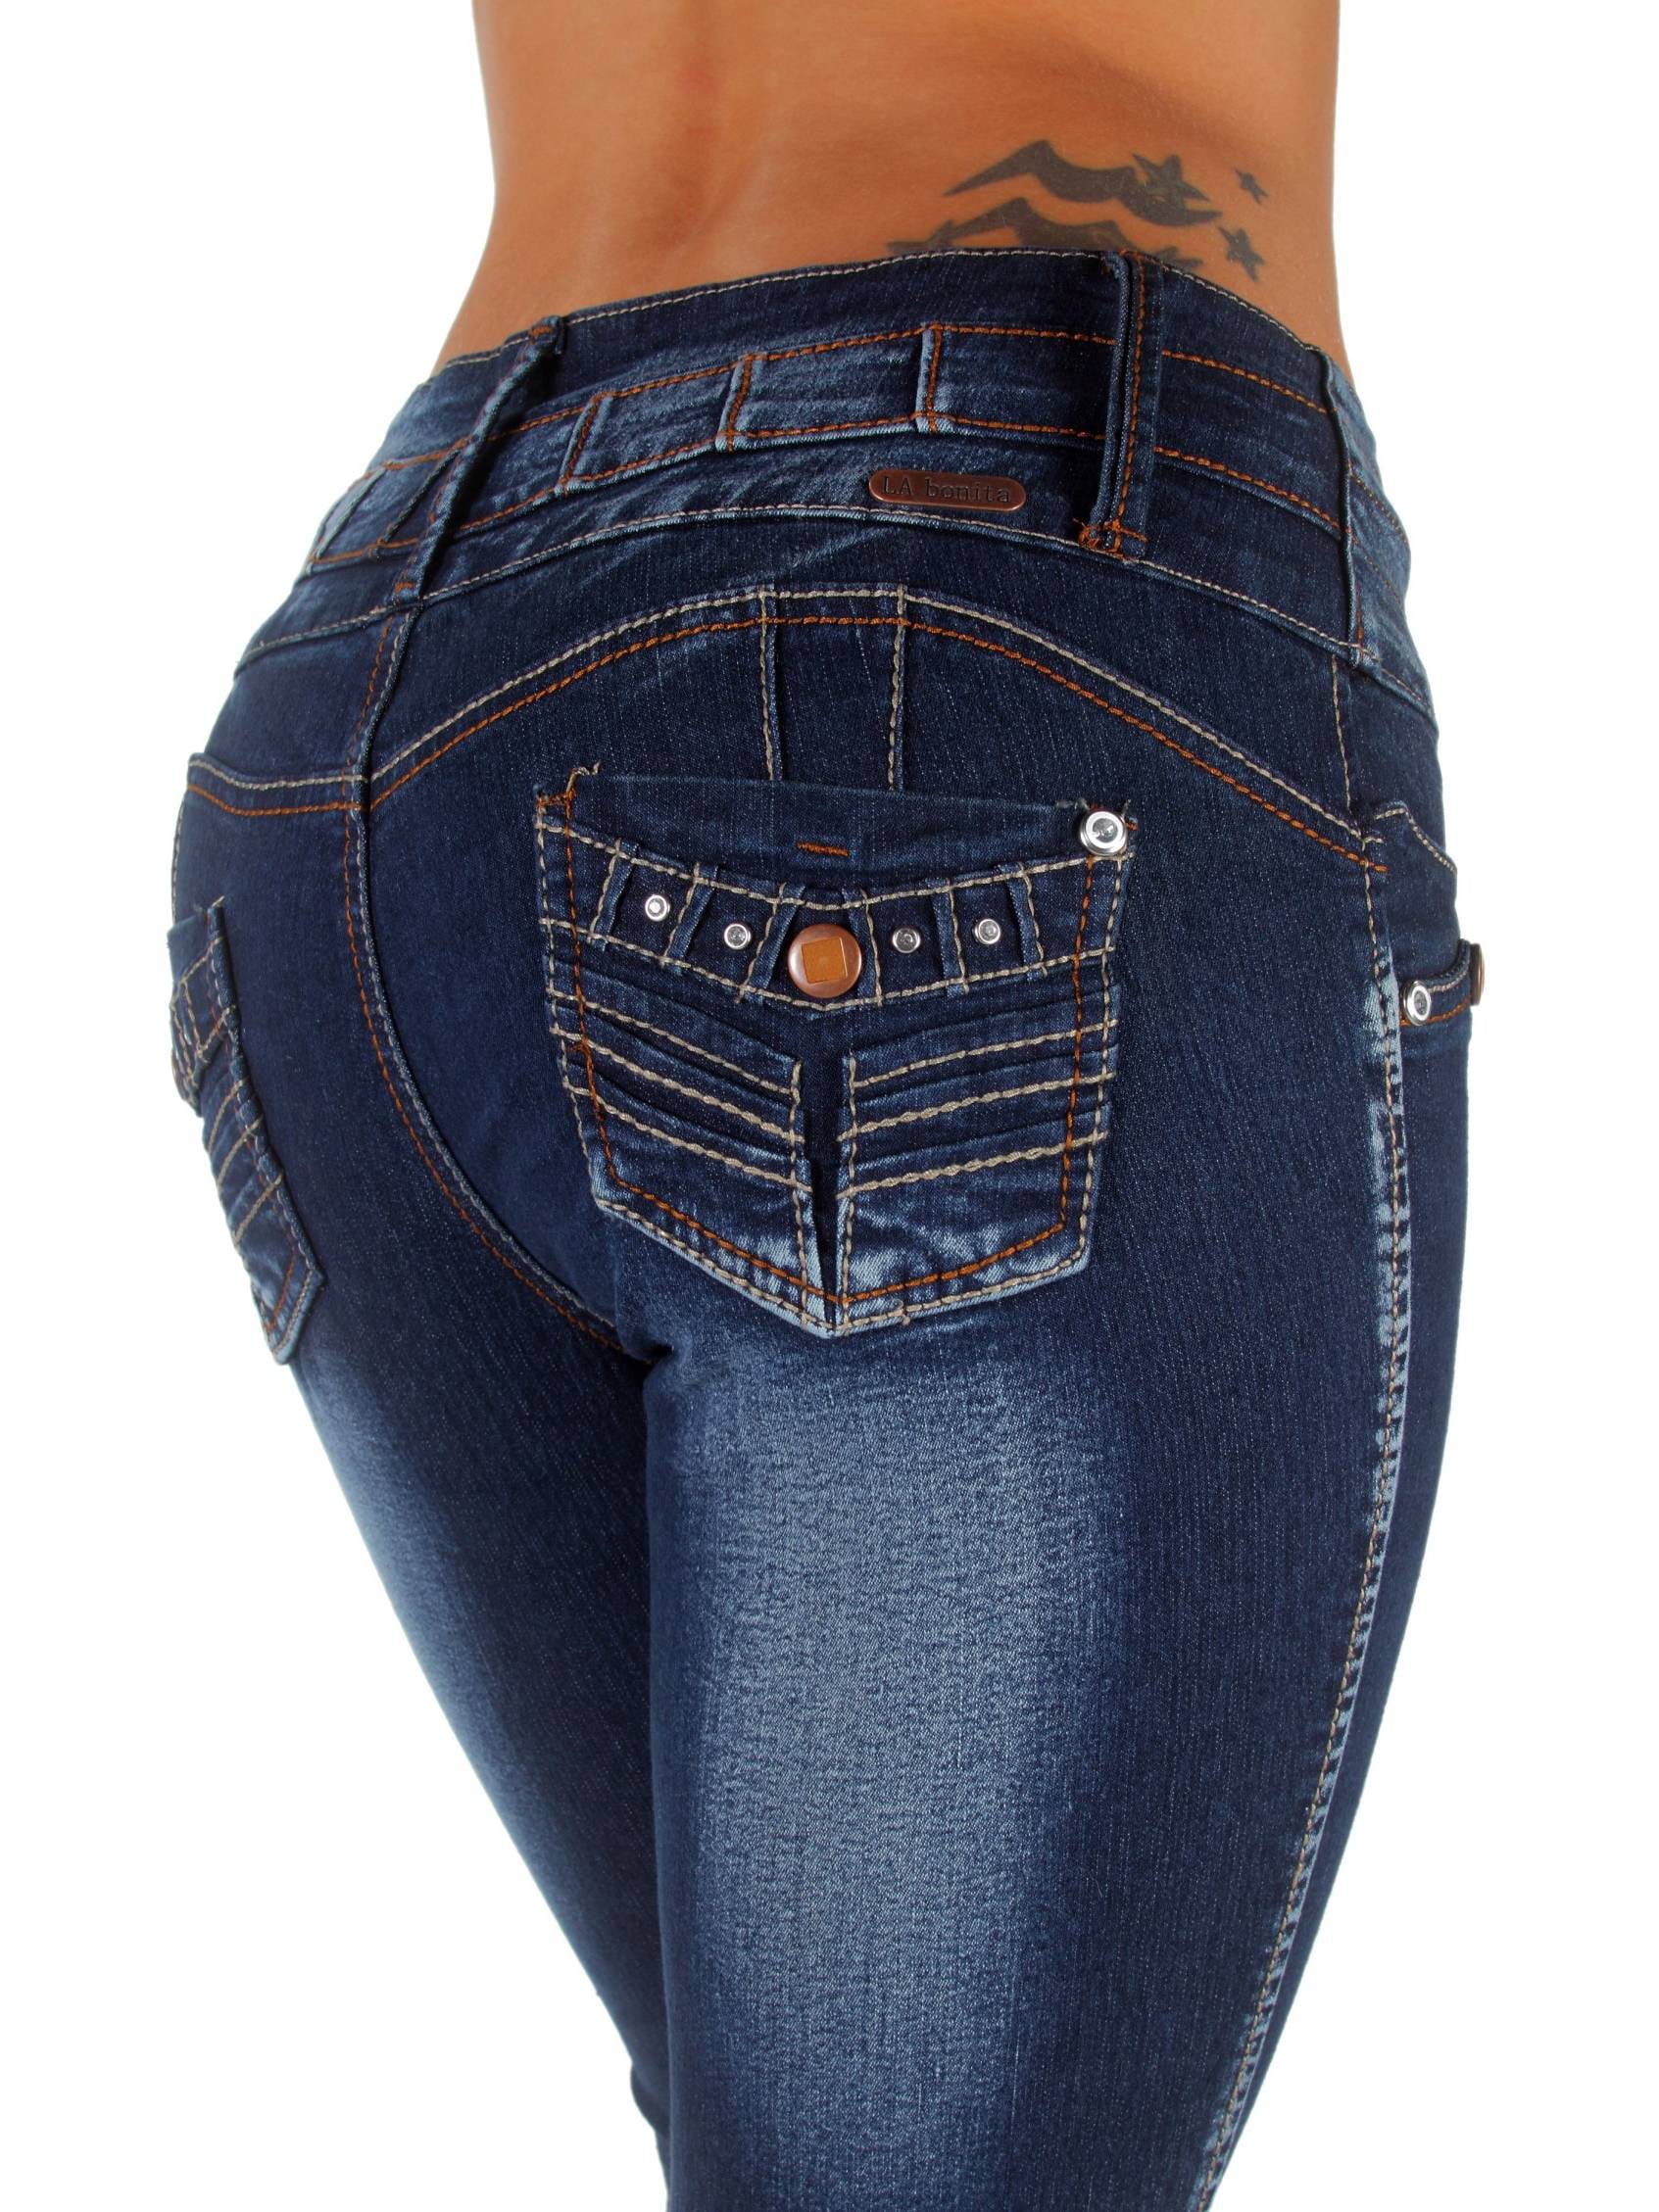 BLUE LA-263 High Waist  Stretch Push-Up Colombian Design Skinny Jeans in M 